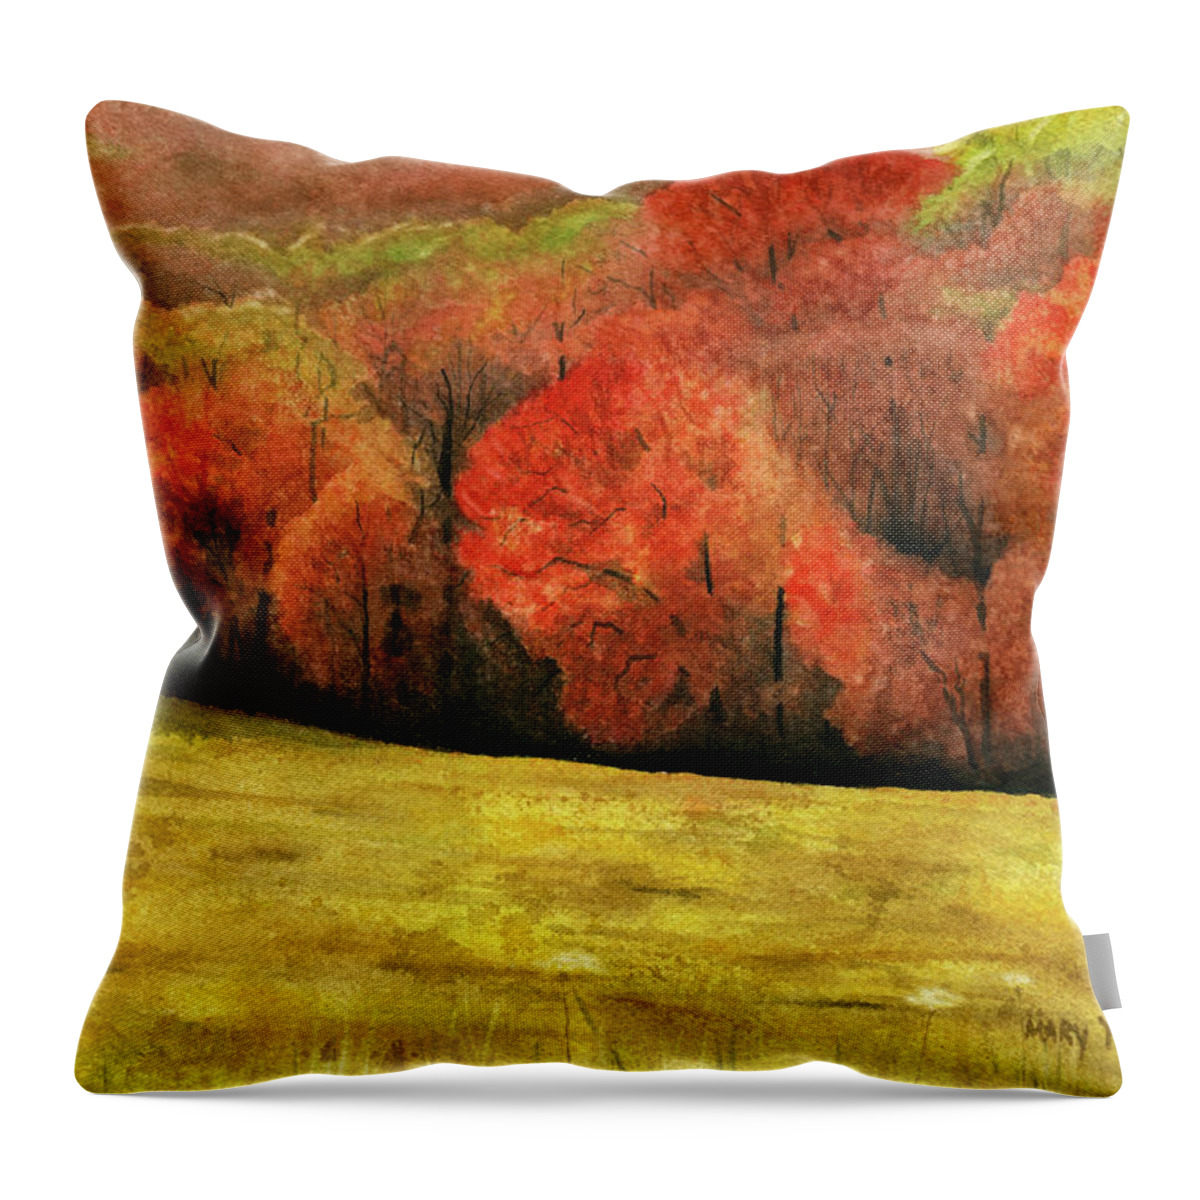 Autumn Throw Pillow featuring the painting Autumn Splendor by Mary Tuomi